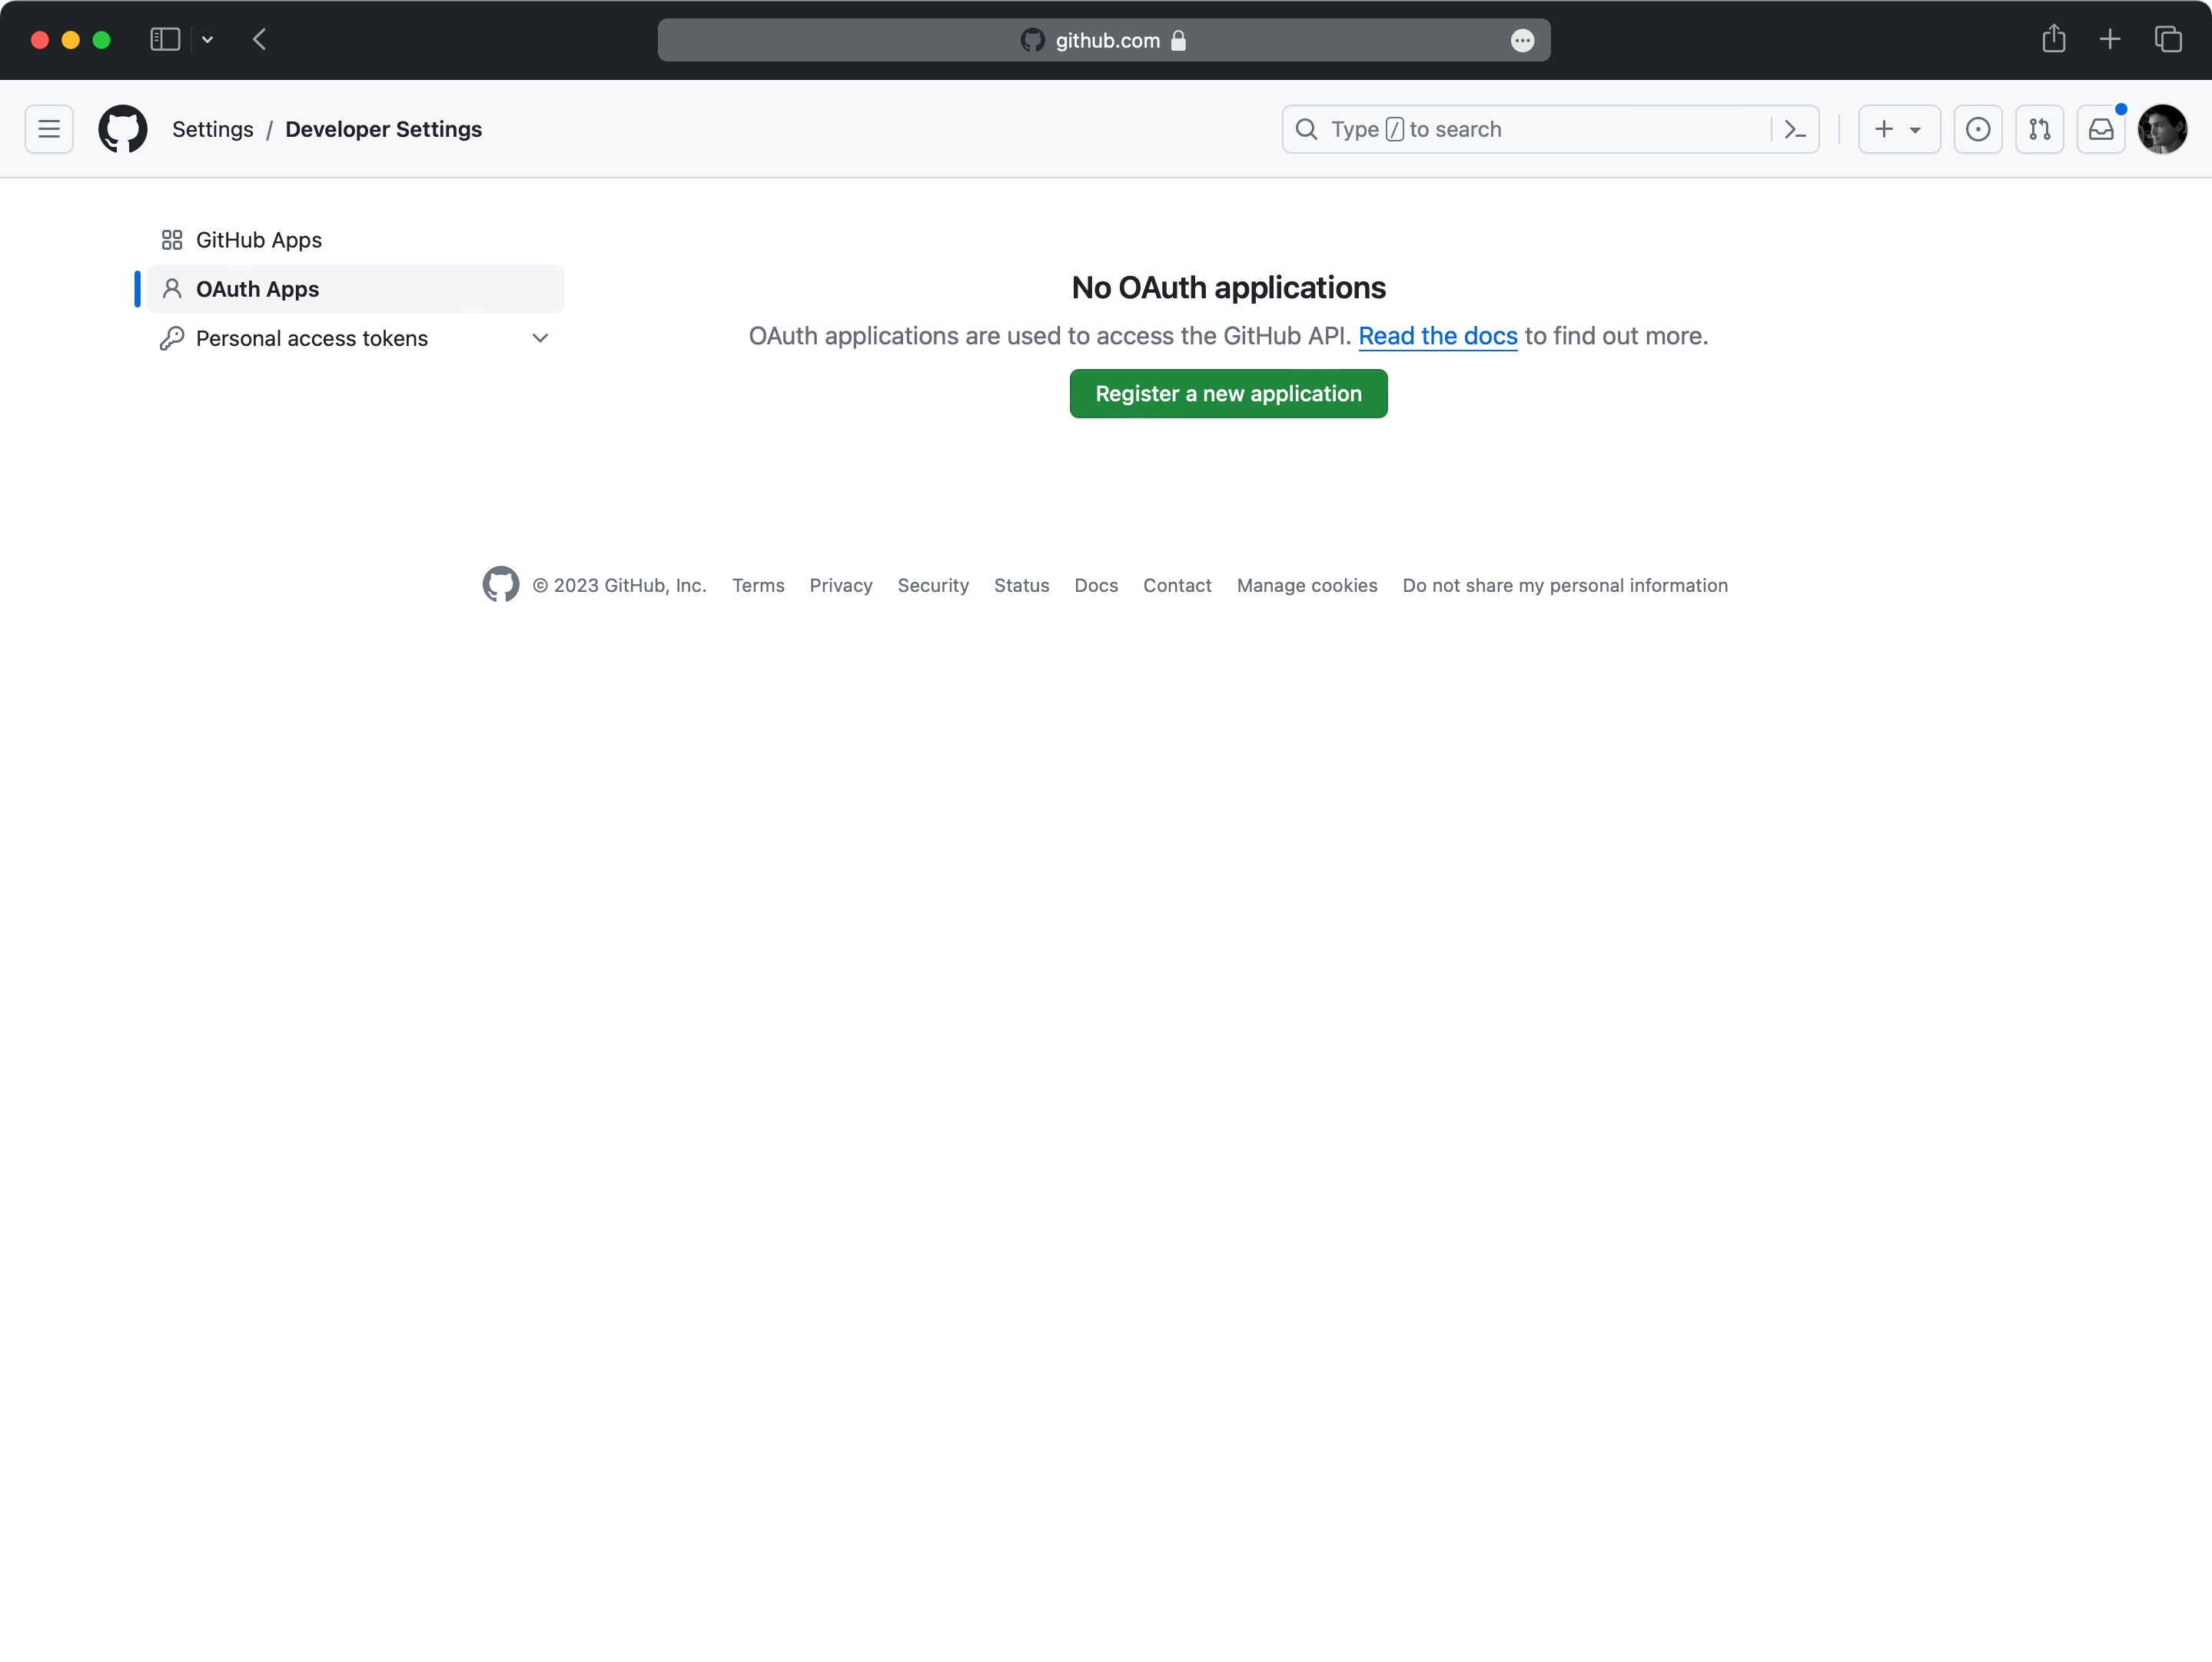 A screenshot showing the GitHub page to register a new OAuth application.